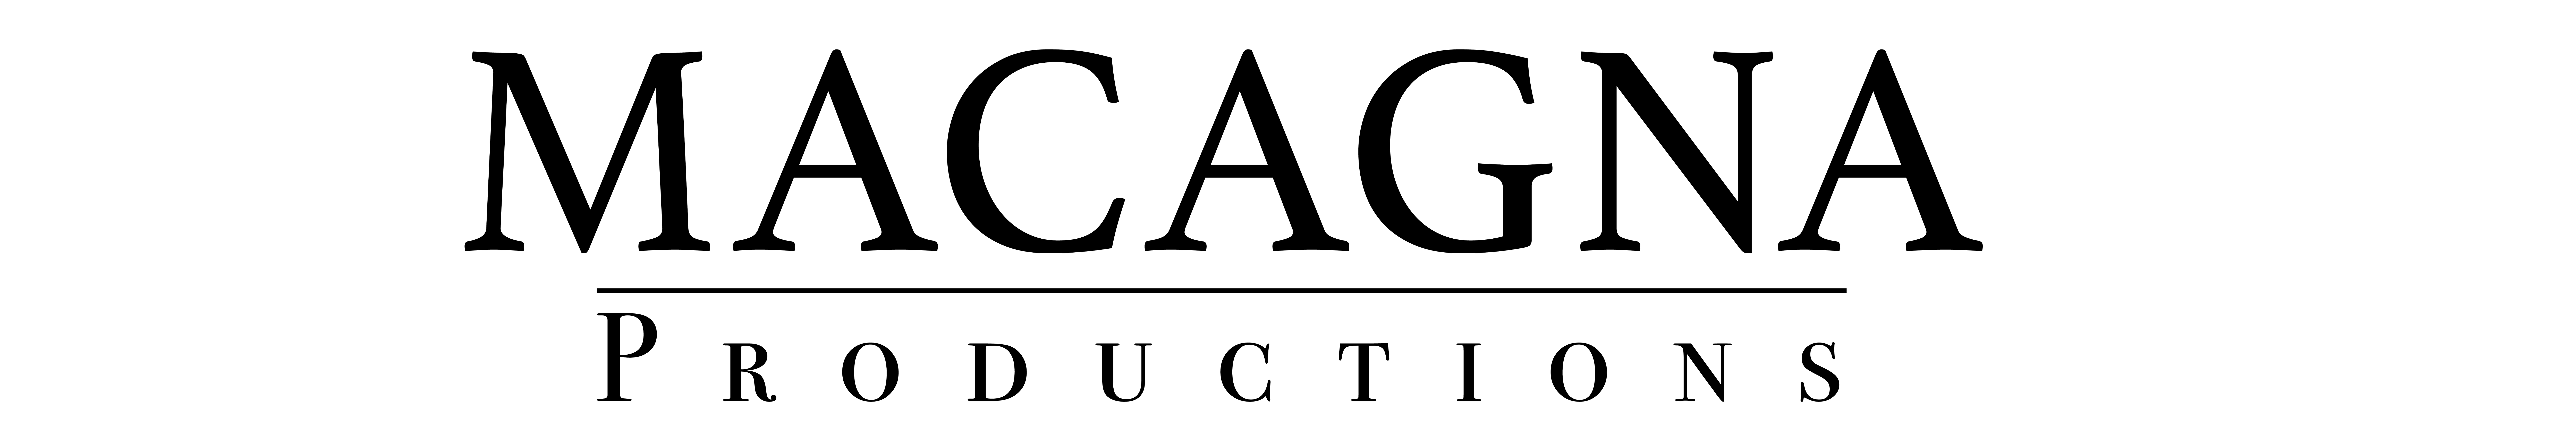 Macagna Productions